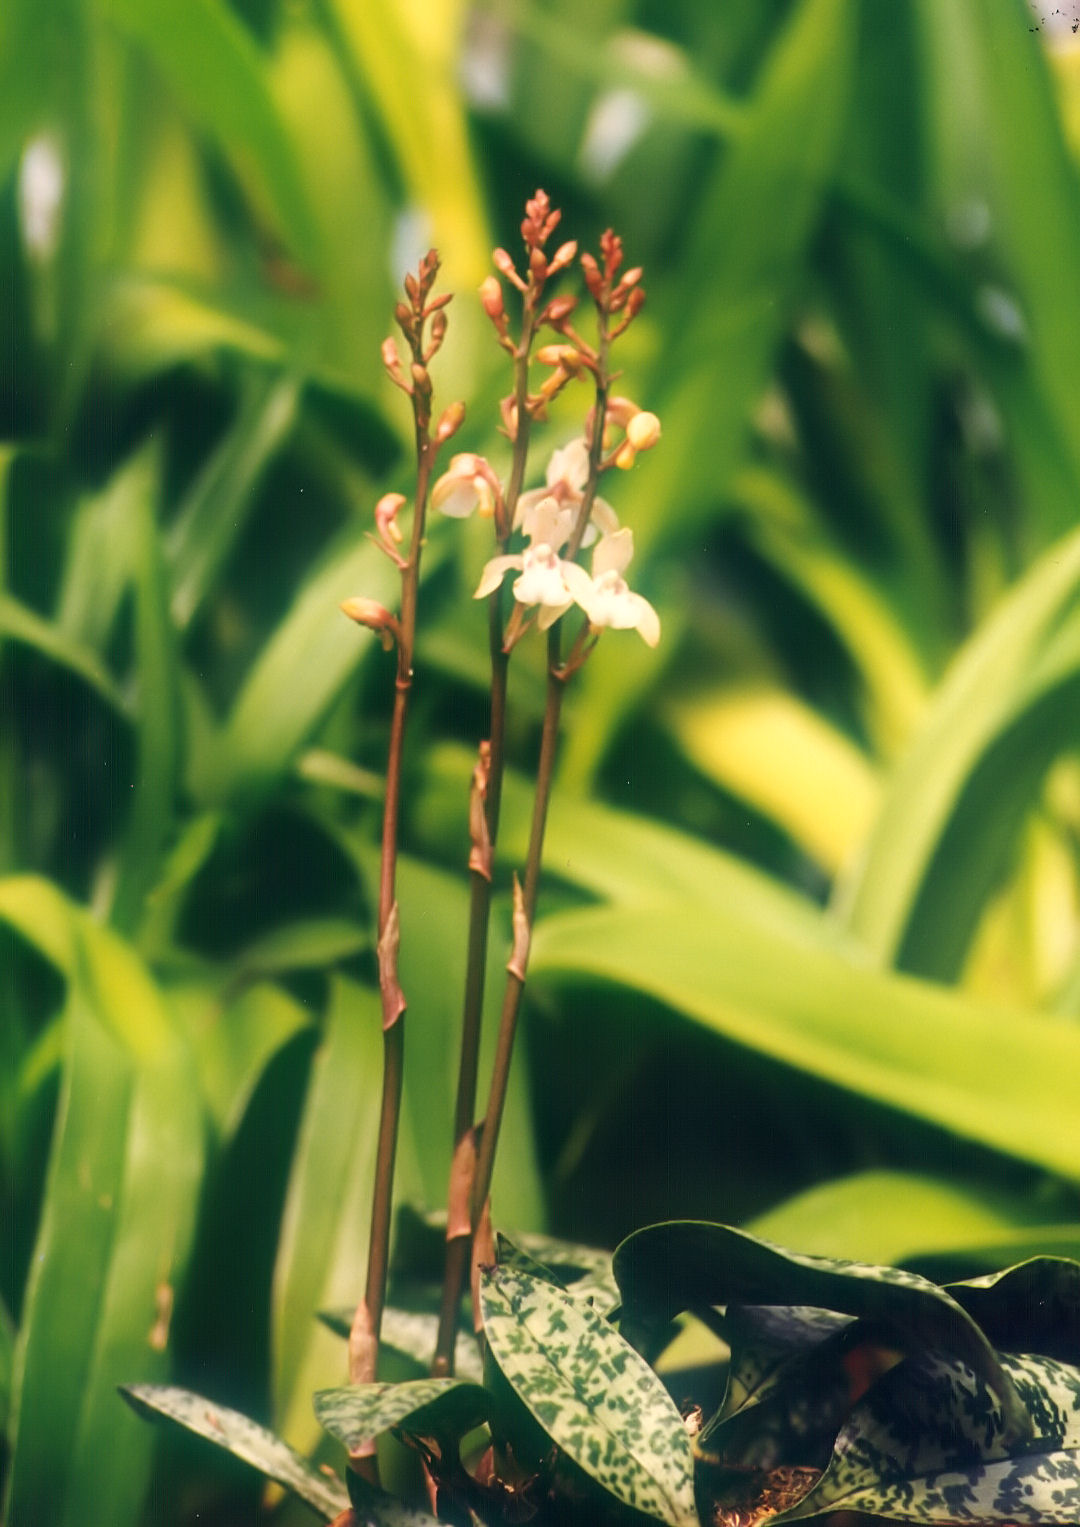 http://upload.wikimedia.org/wikipedia/commons/0/07/A_and_B_Larsen_orchids_-_Oeceoclades_maculata_451-3.jpg